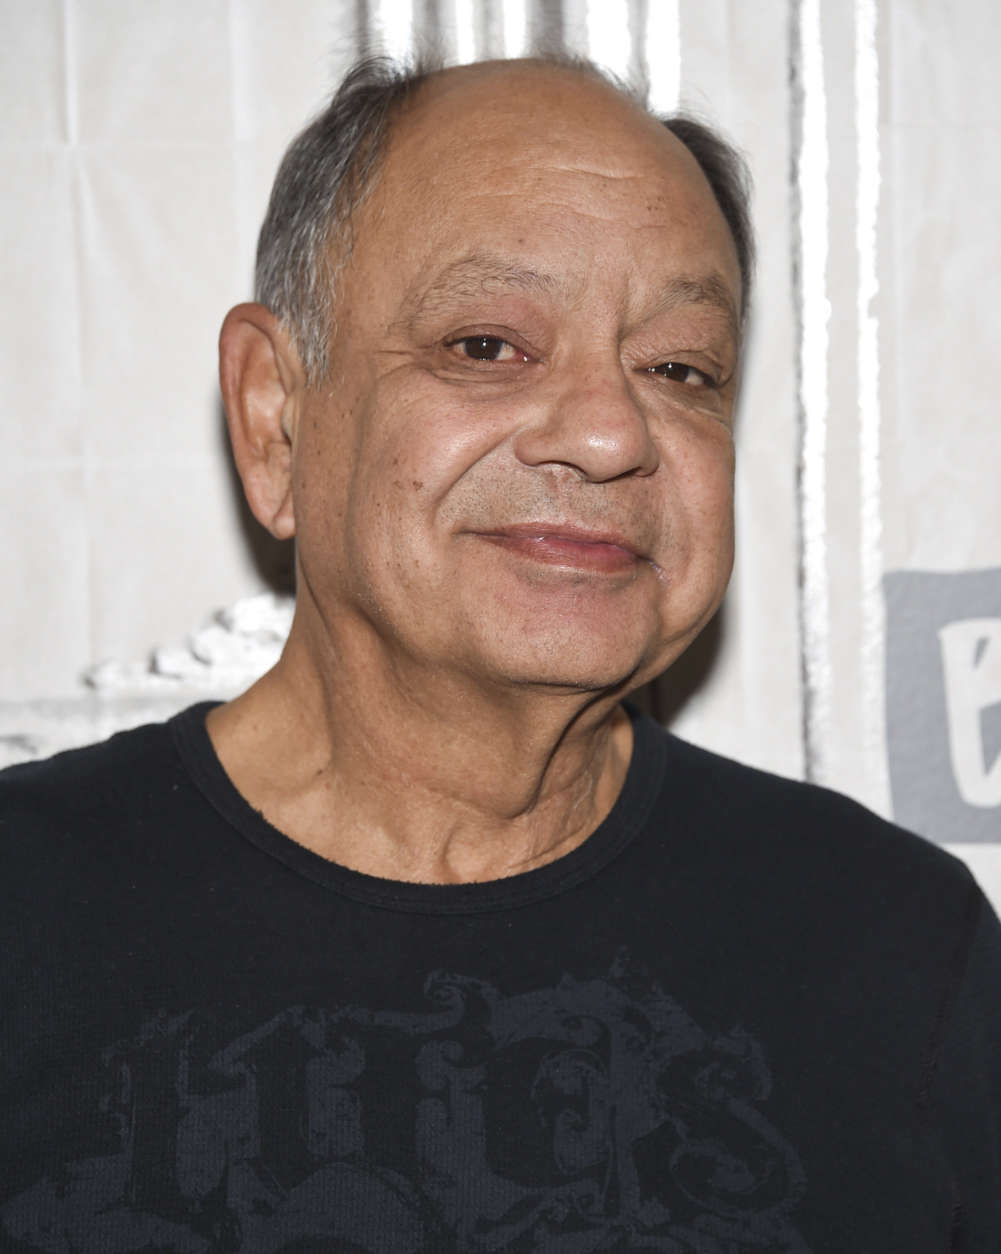 Actor and author Cheech Marin participates in the BUILD Speaker Series to discuss his new book, "Cheech Is Not My Real Name: ... But Don't Call Me Chong", at AOL Studios on Tuesday, March 14, 2017, in New York. (Photo by Evan Agostini/Invision/AP)